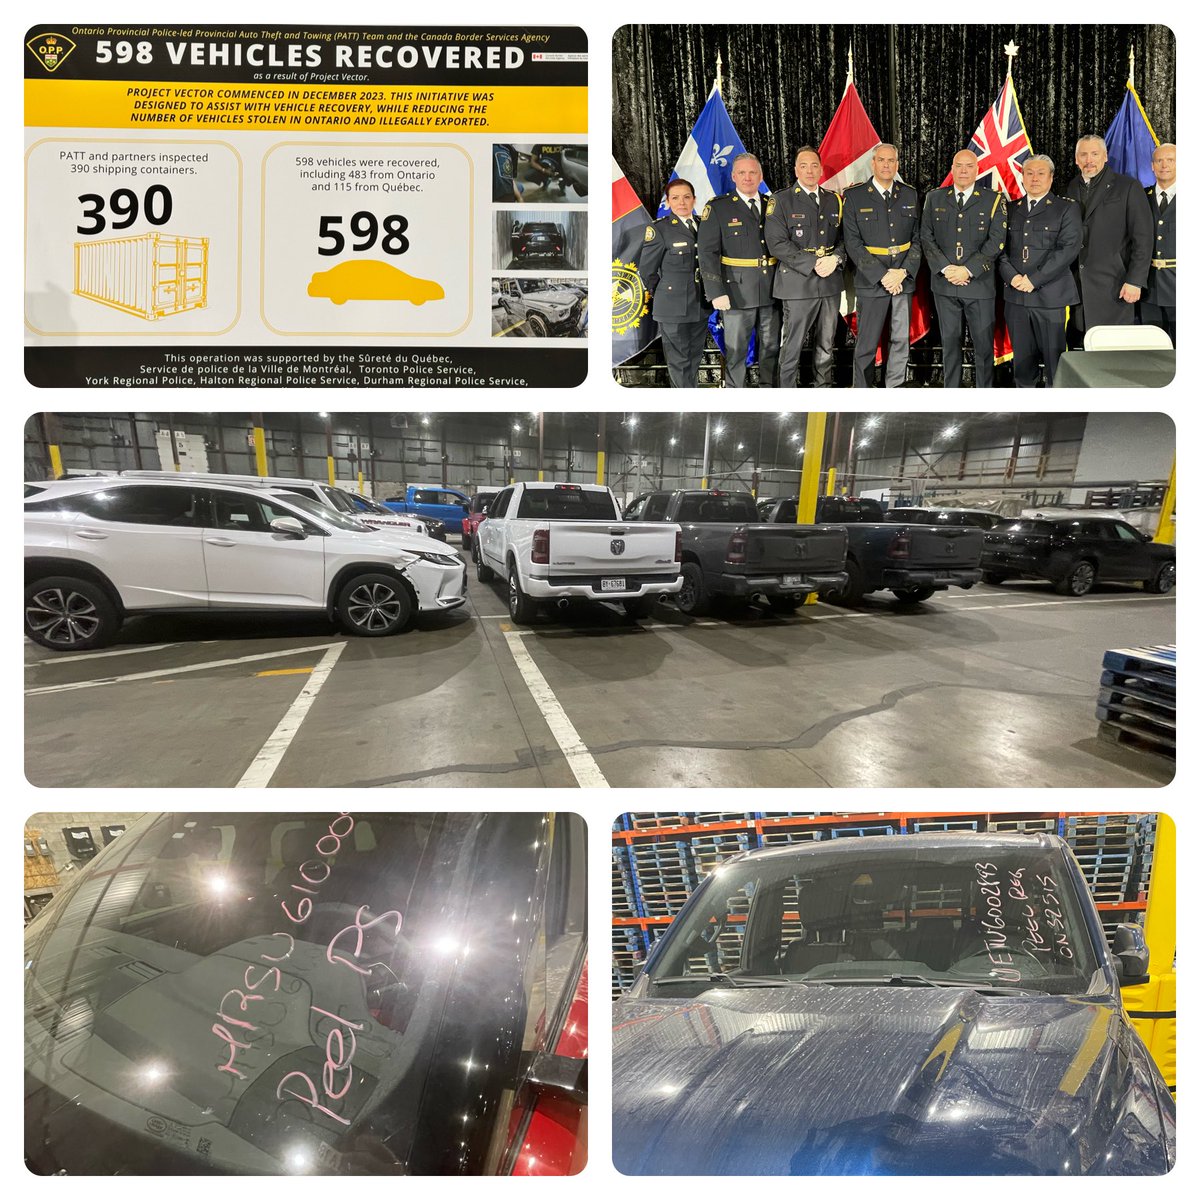 Project Vector resulted in recovery of 598 vehicles which were stolen from our communities & destined for export. @PeelPolice partnered by sending investigators to assist with interdiction. Our team is committed to fighting #autotheft and will travel to Montreal to help do this.